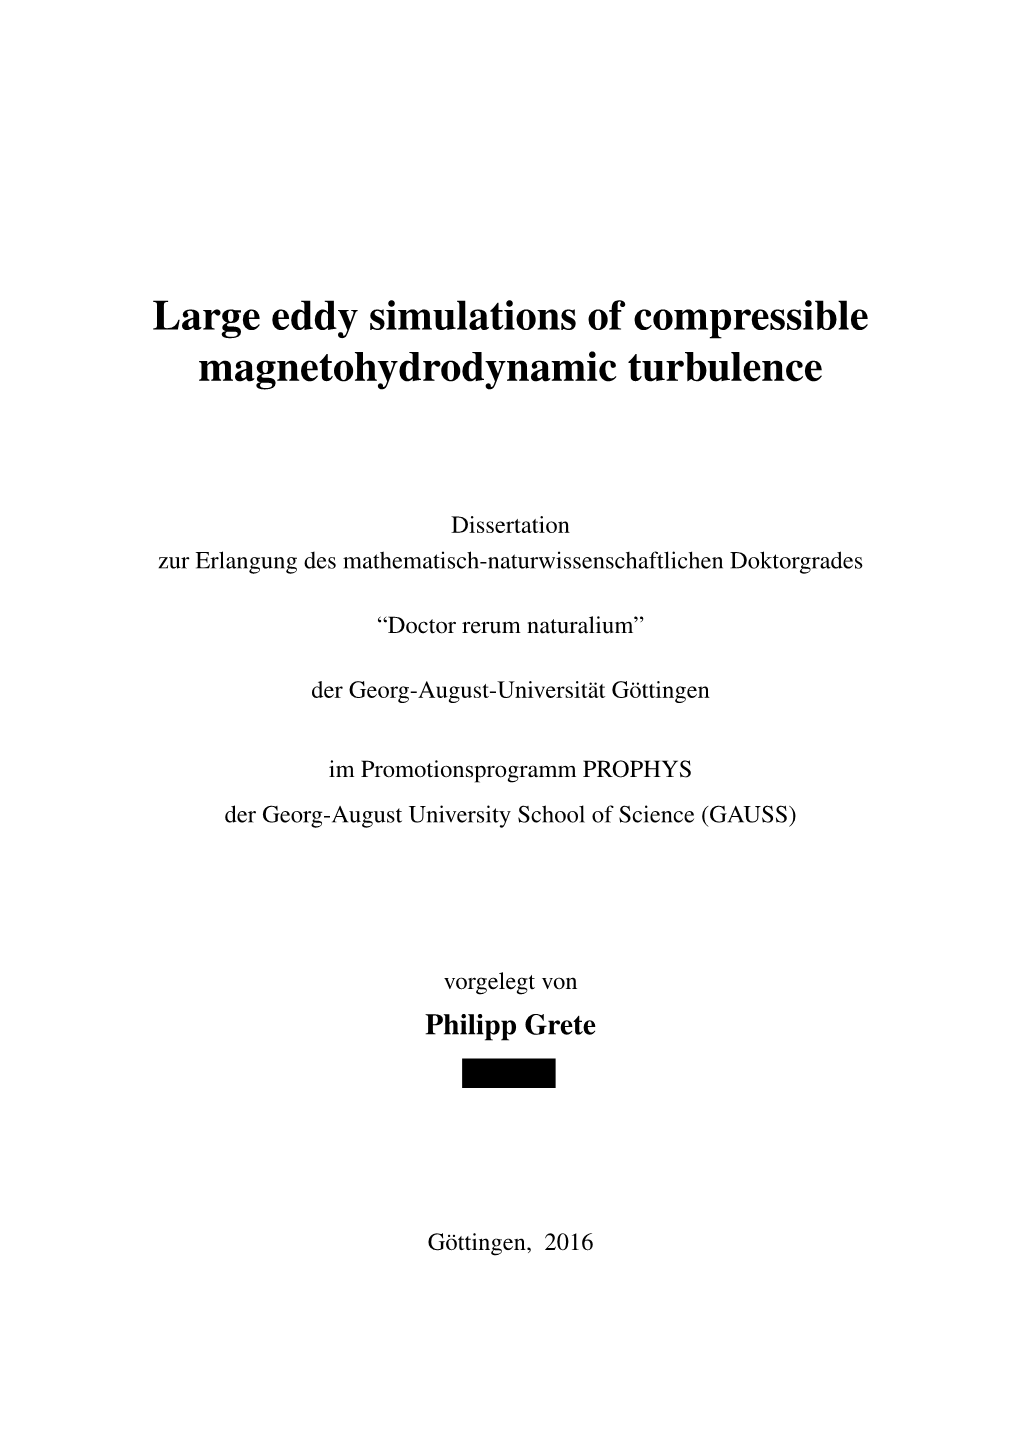 Large Eddy Simulations of Compressible Magnetohydrodynamic Turbulence